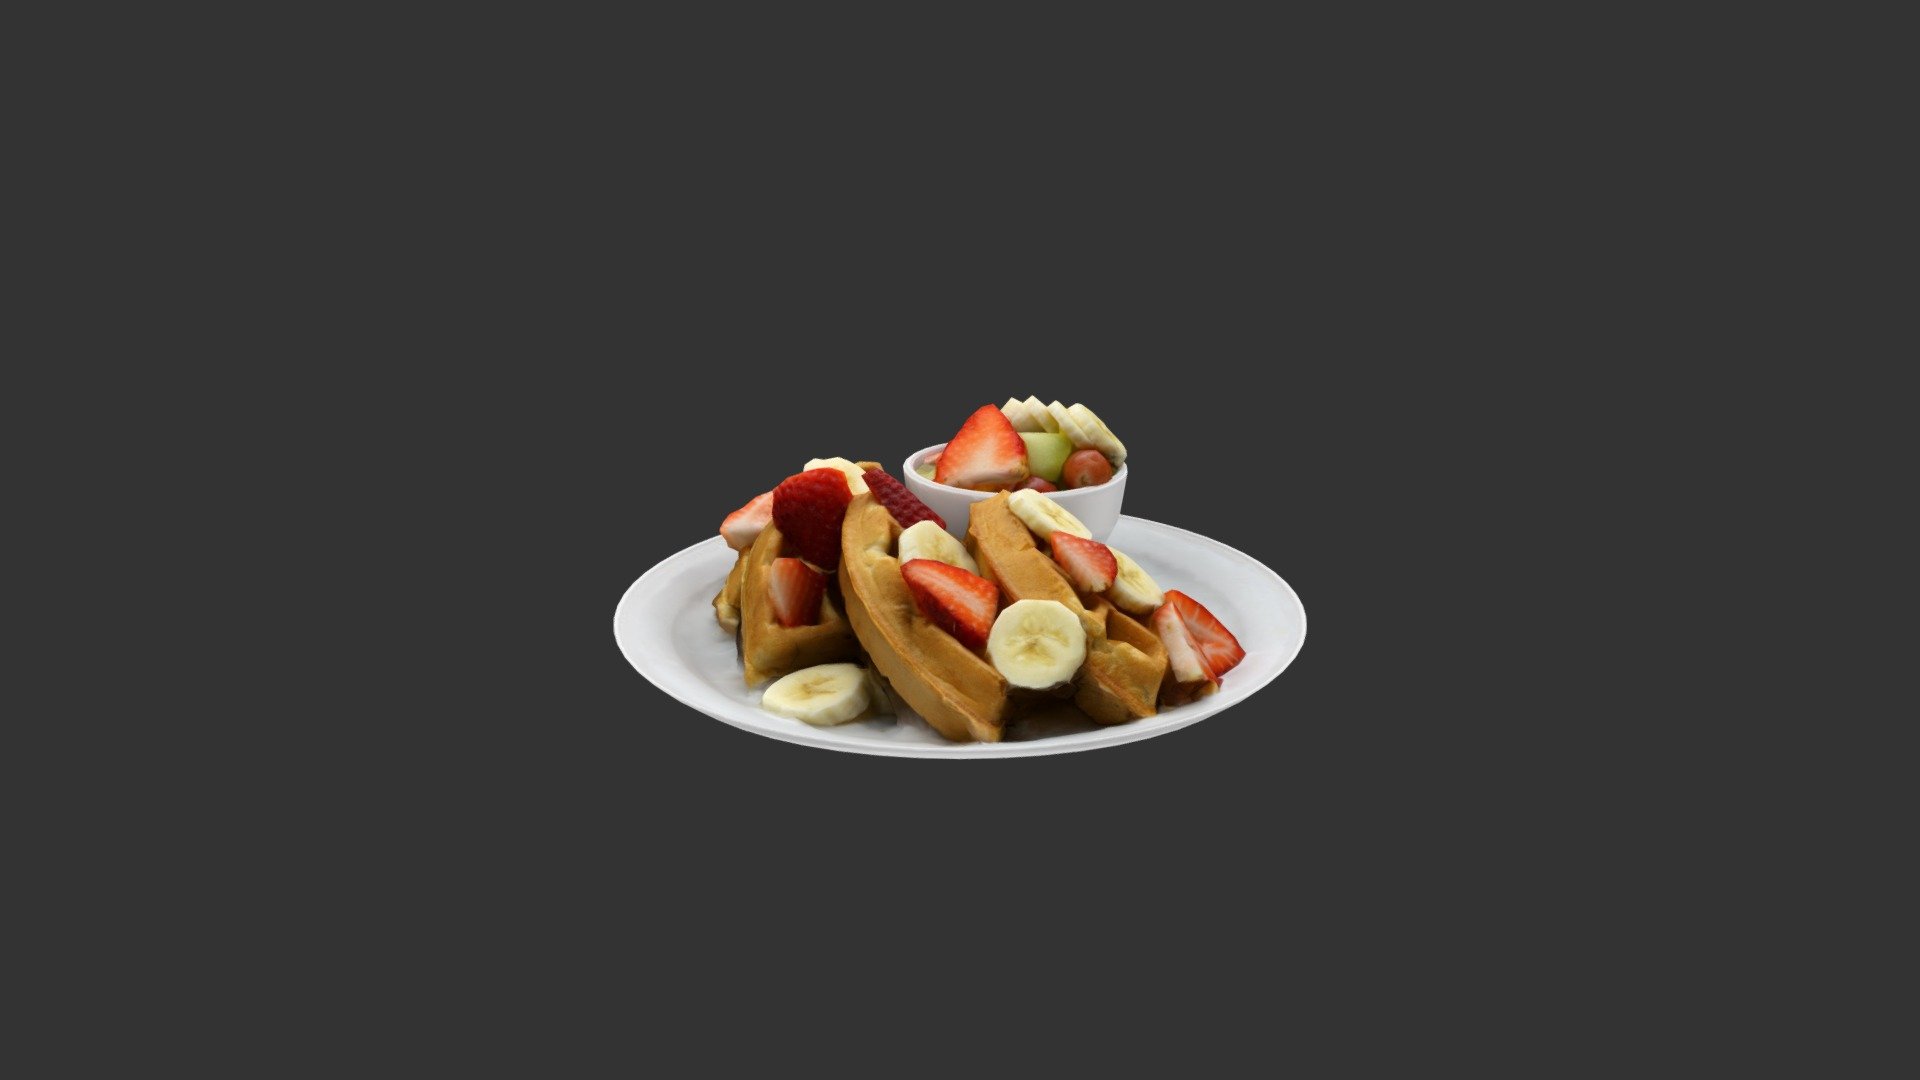 BELGIAN WAFFLE for symposium restaurant - BELGIAN WAFFLE - 3D model by menuthat 3d model